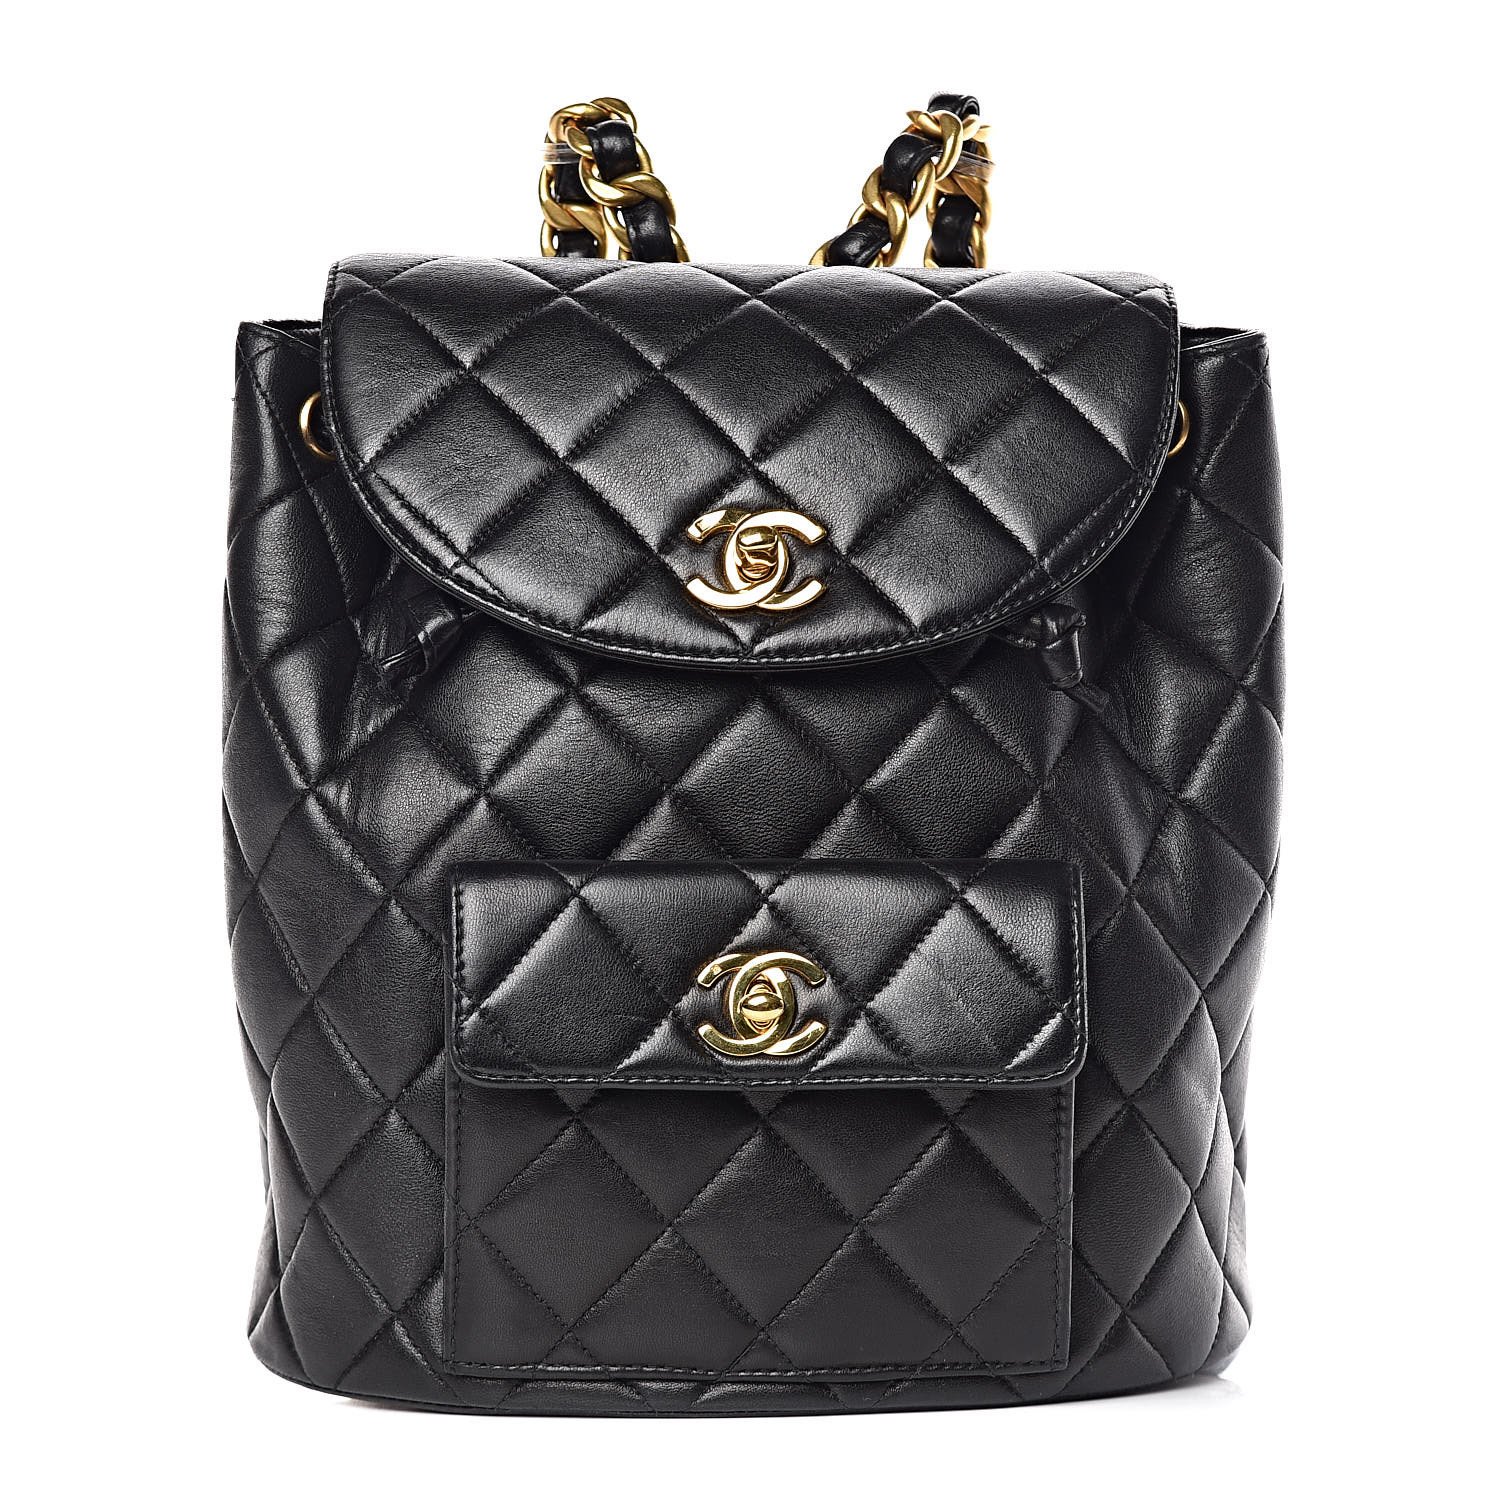 CHANEL Lambskin Quilted Drawstring Backpack Black 423010